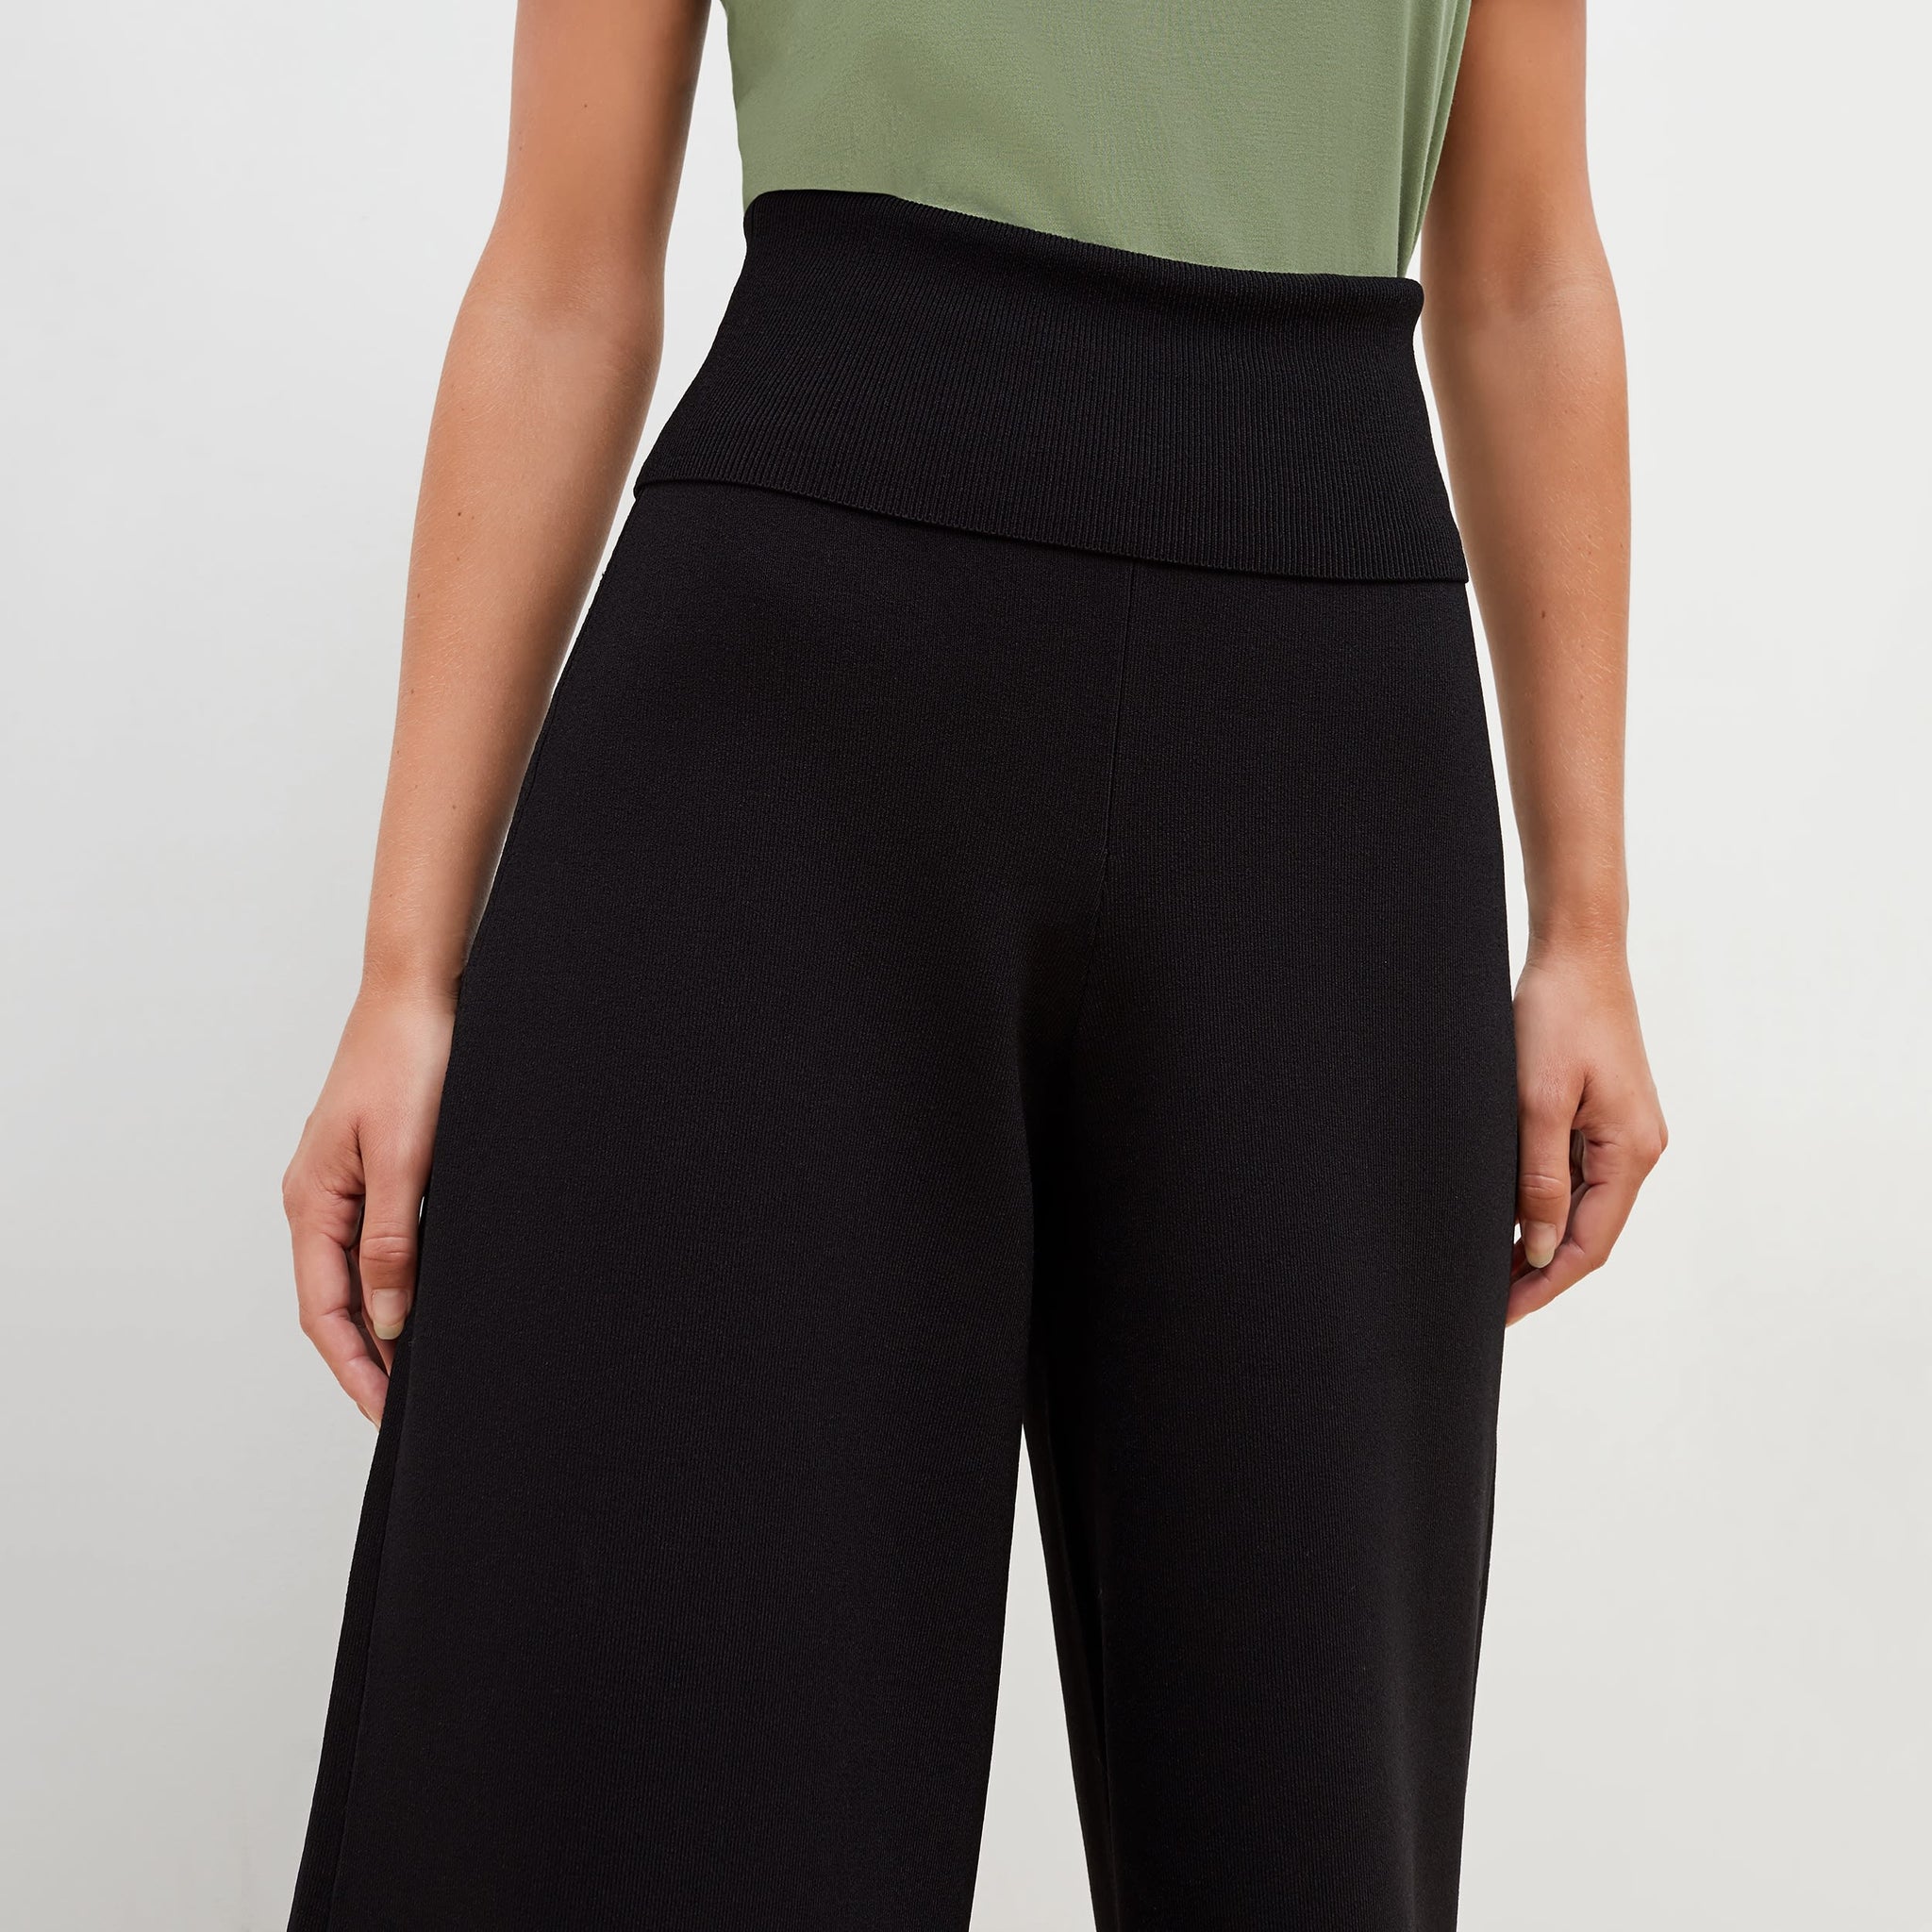 Detail image of a woman standing wearing the Rogala Pant—Jardigan Knit in Black